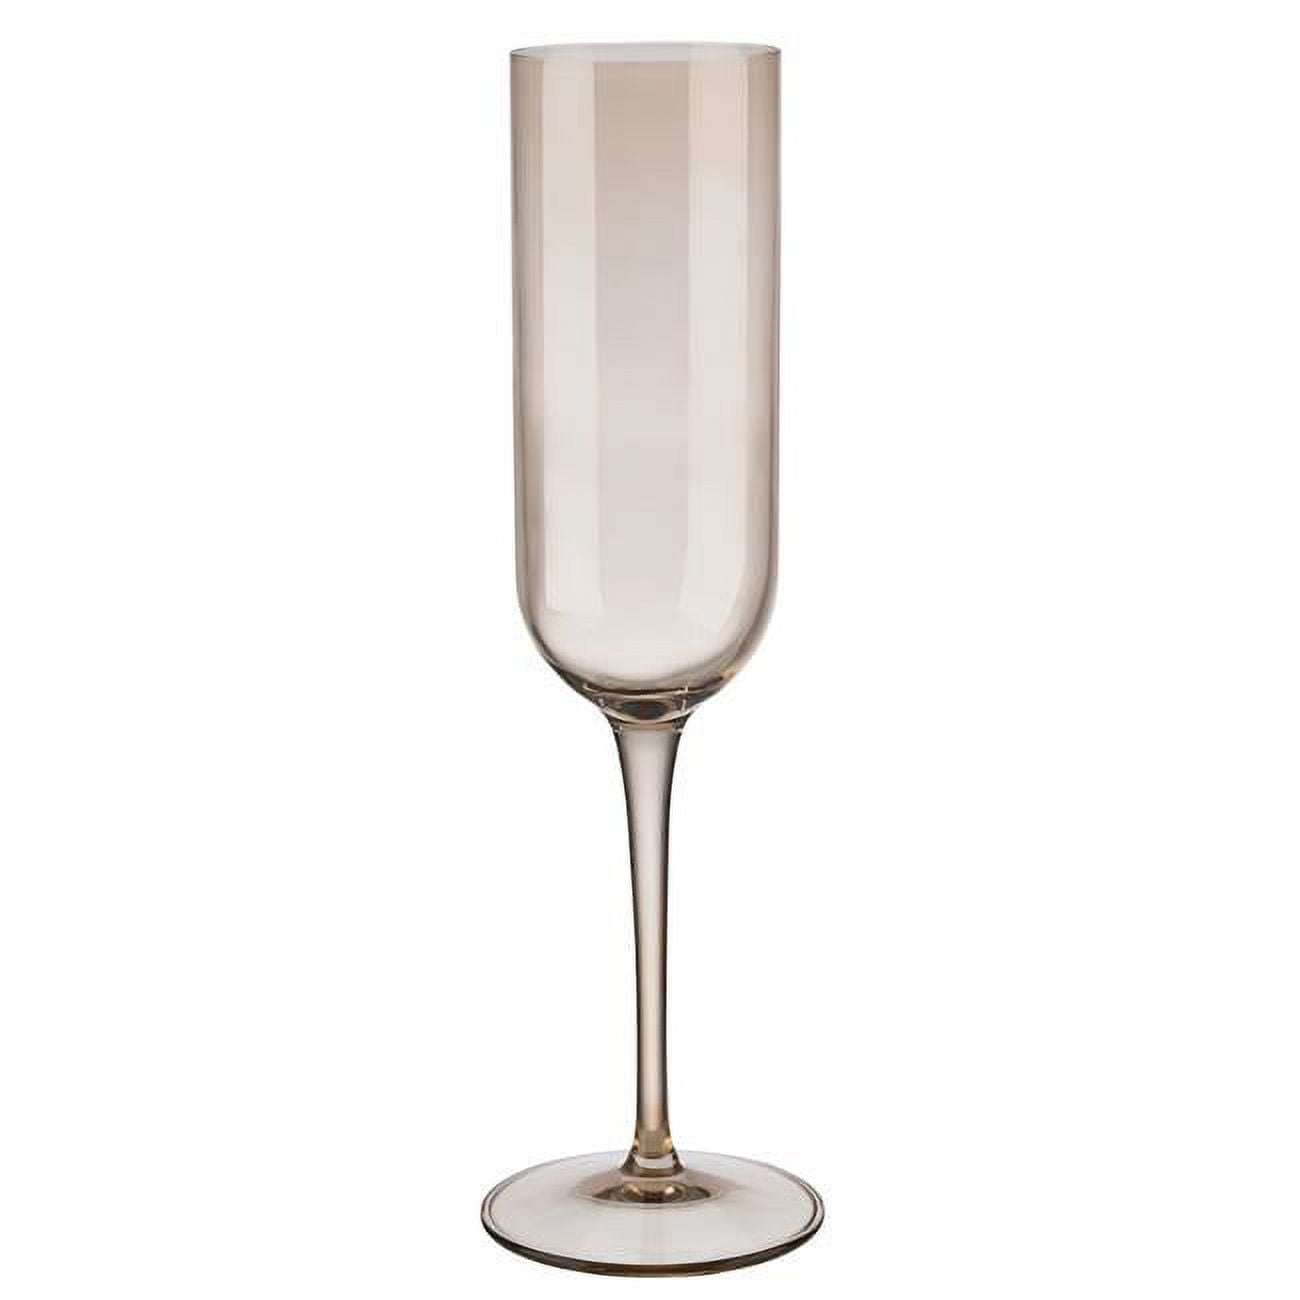 Picture of Blomus 63938 7 oz Fuum Champagne Flute Glass, Nomad - Set of 4